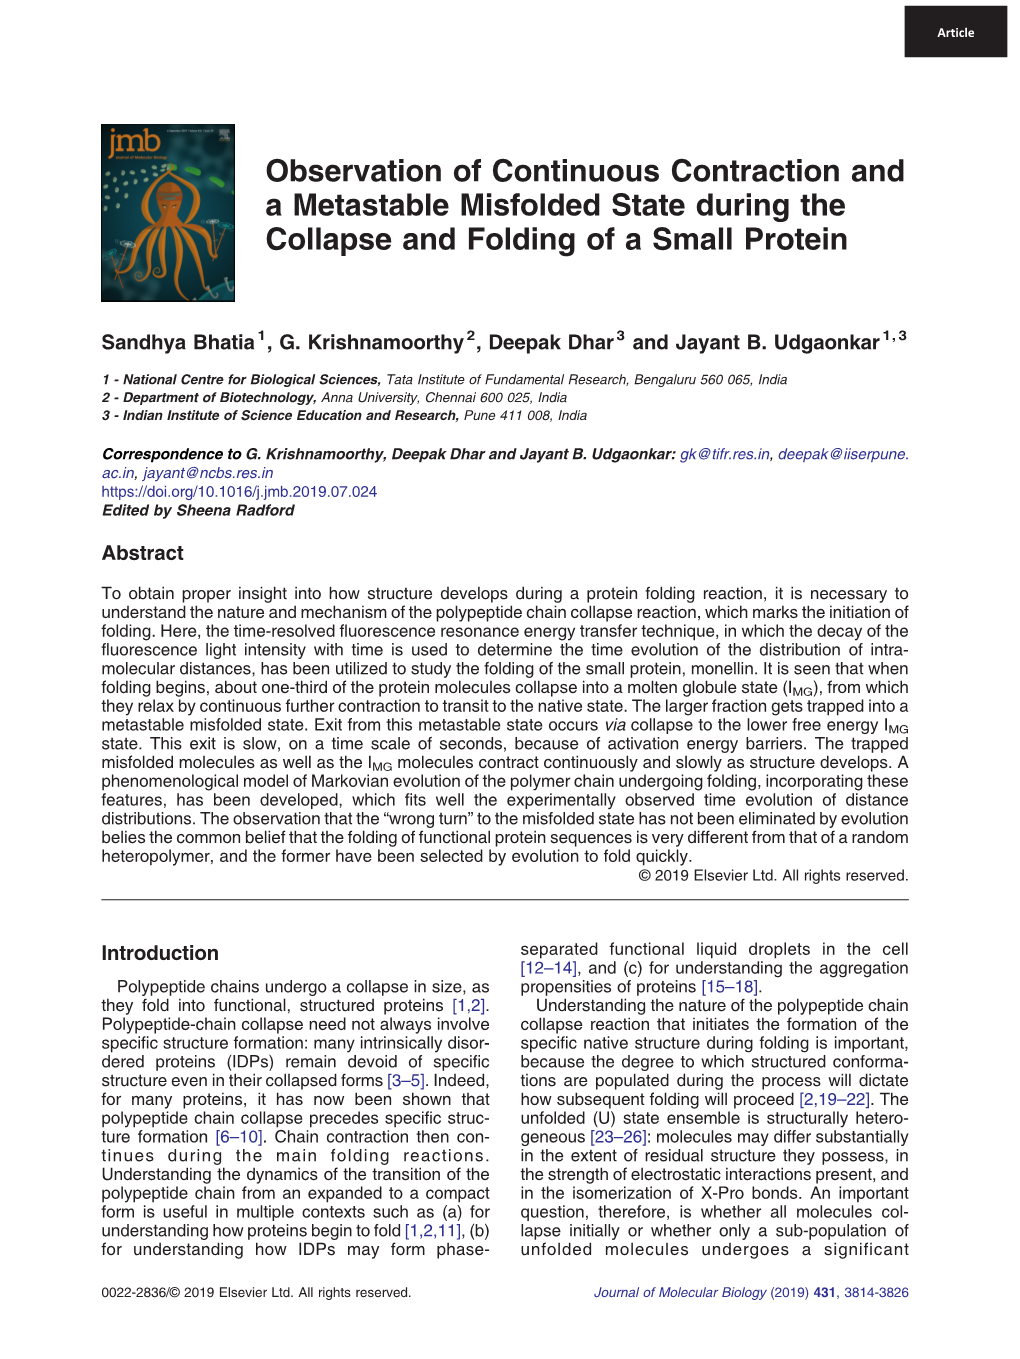 Observation of Continuous Contraction and a Metastable Misfolded State During the Collapse and Folding of a Small Protein